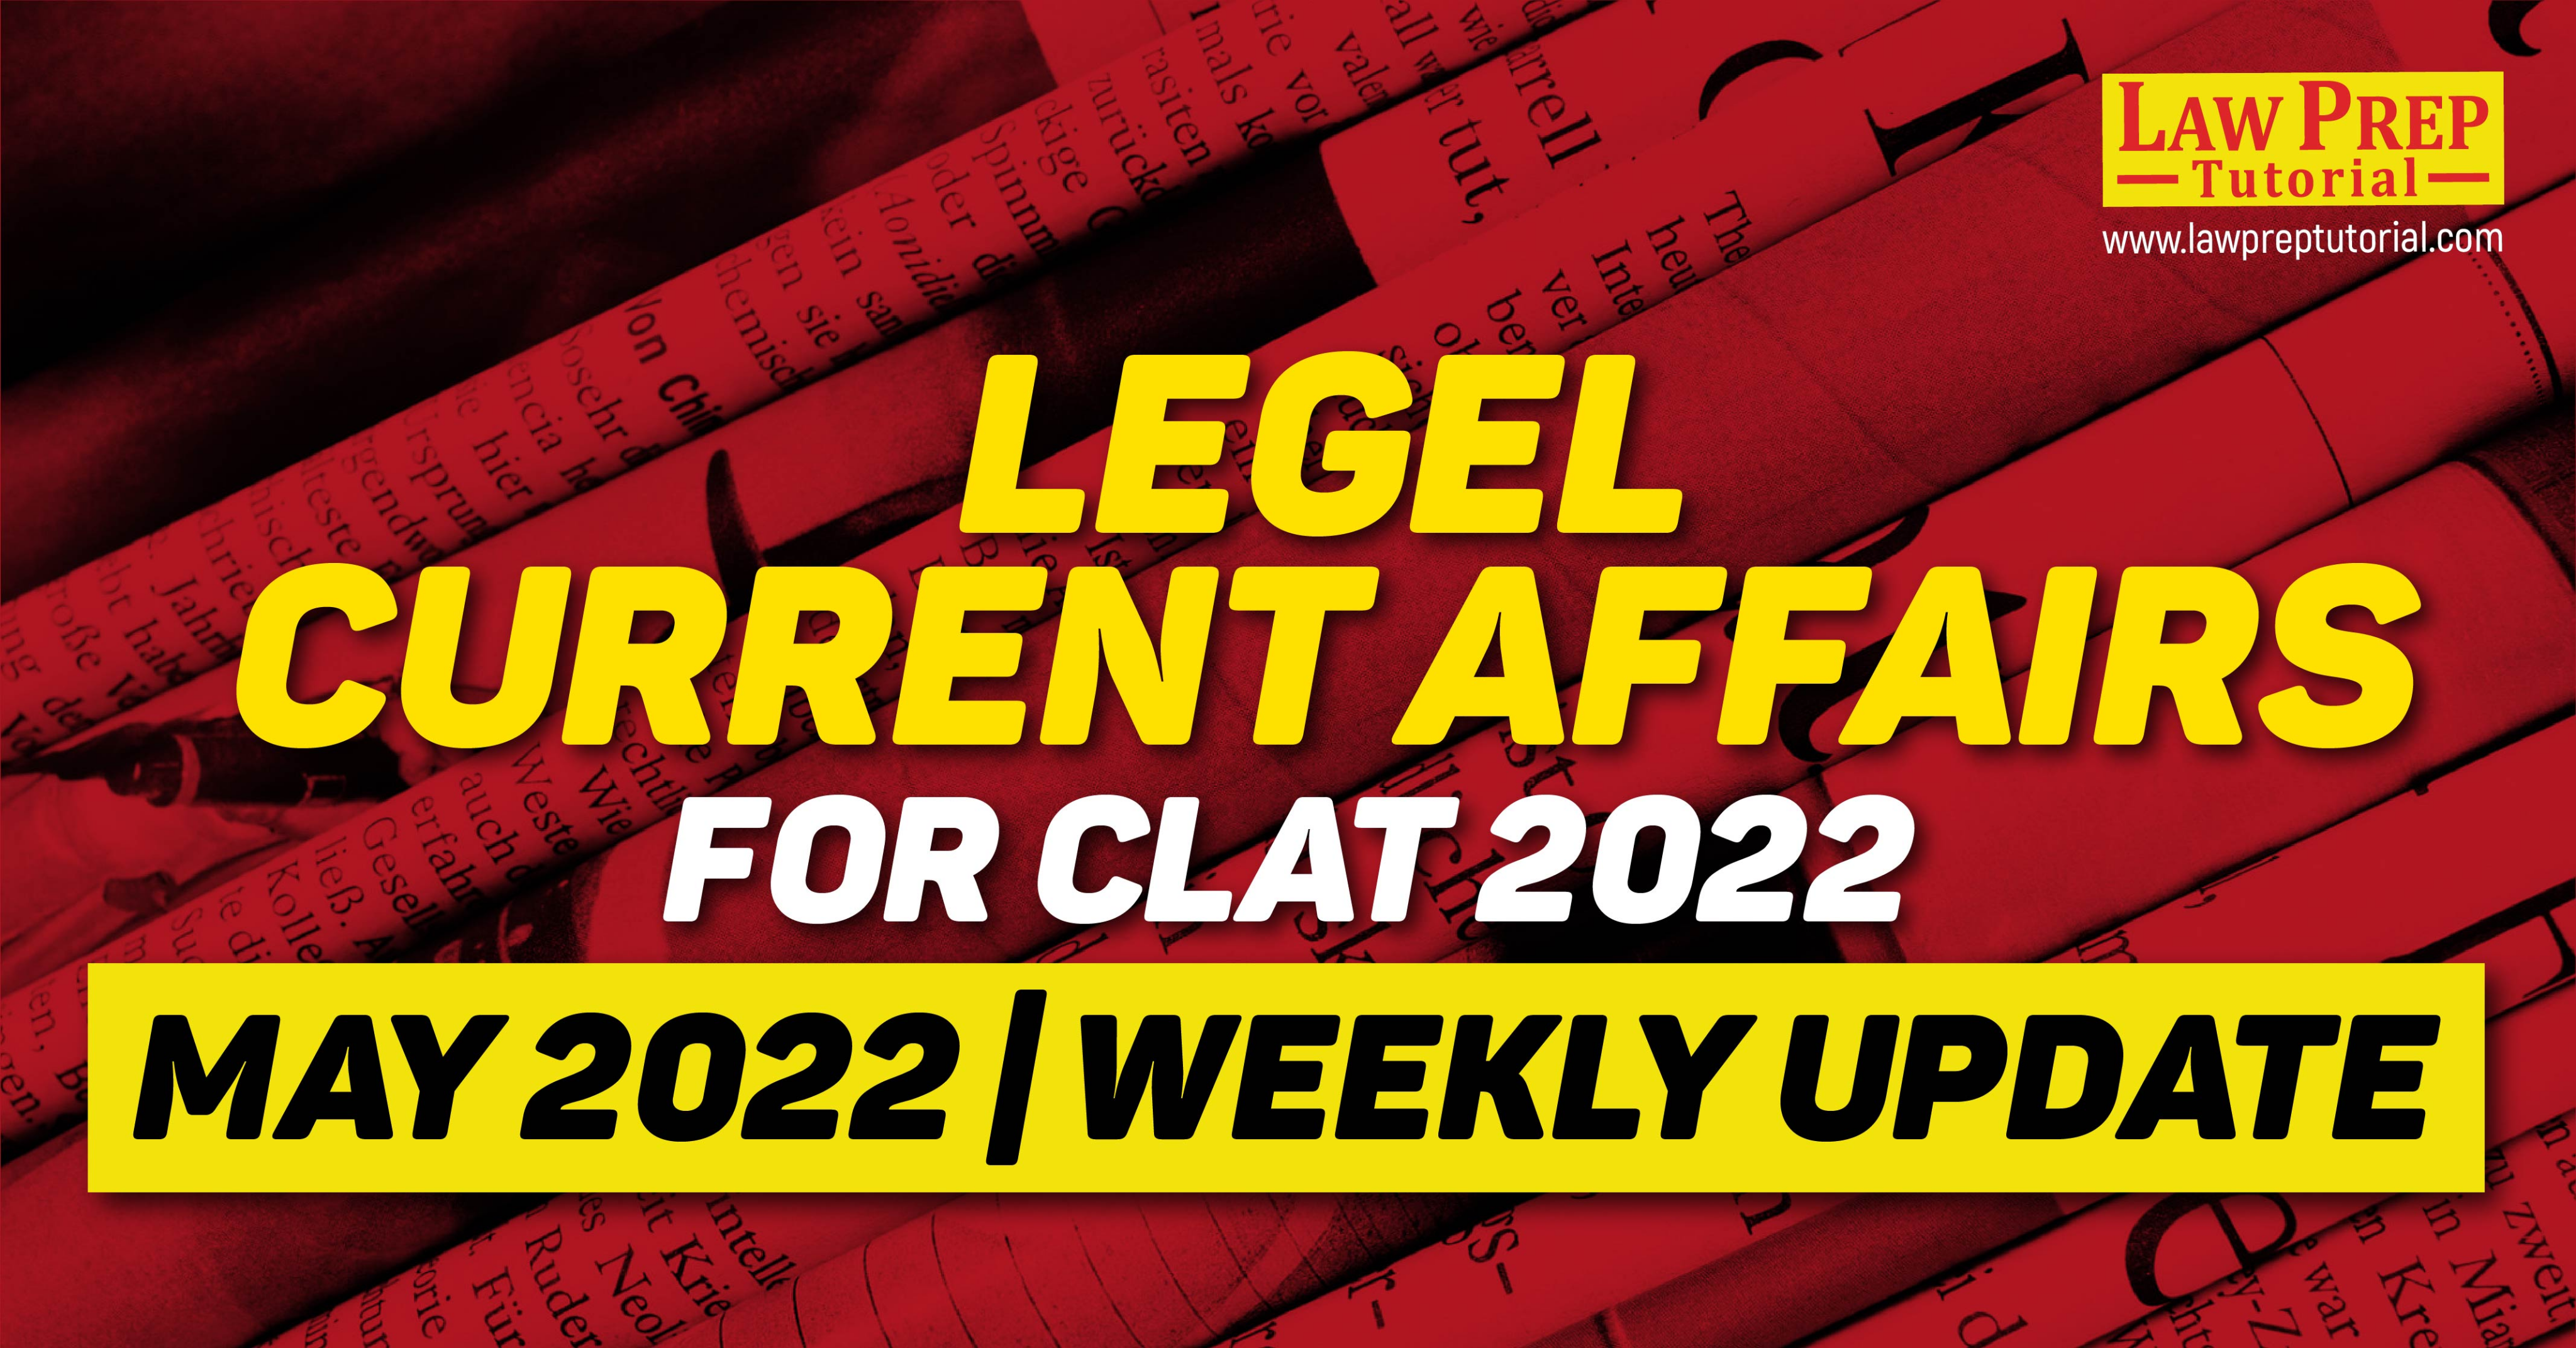 Legal Current Affairs For Clat 2022